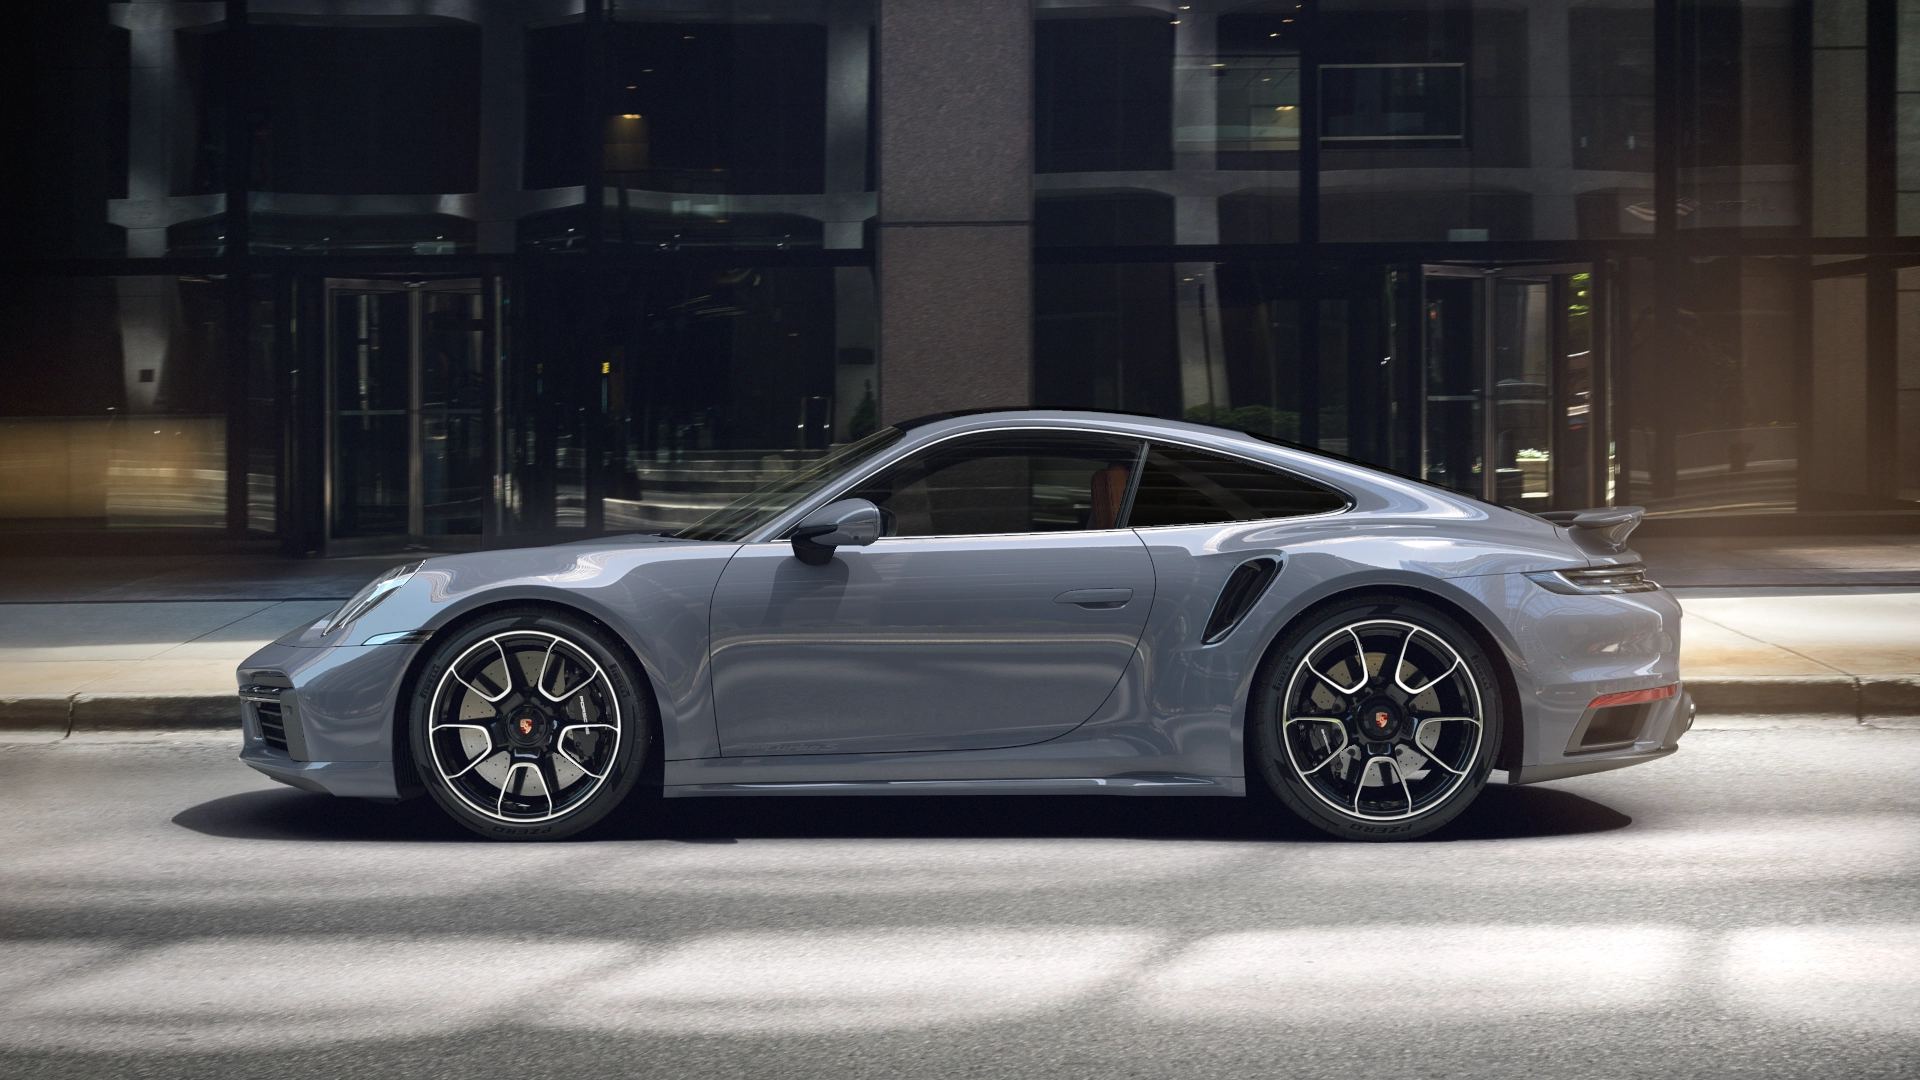 911 Turbo S side view